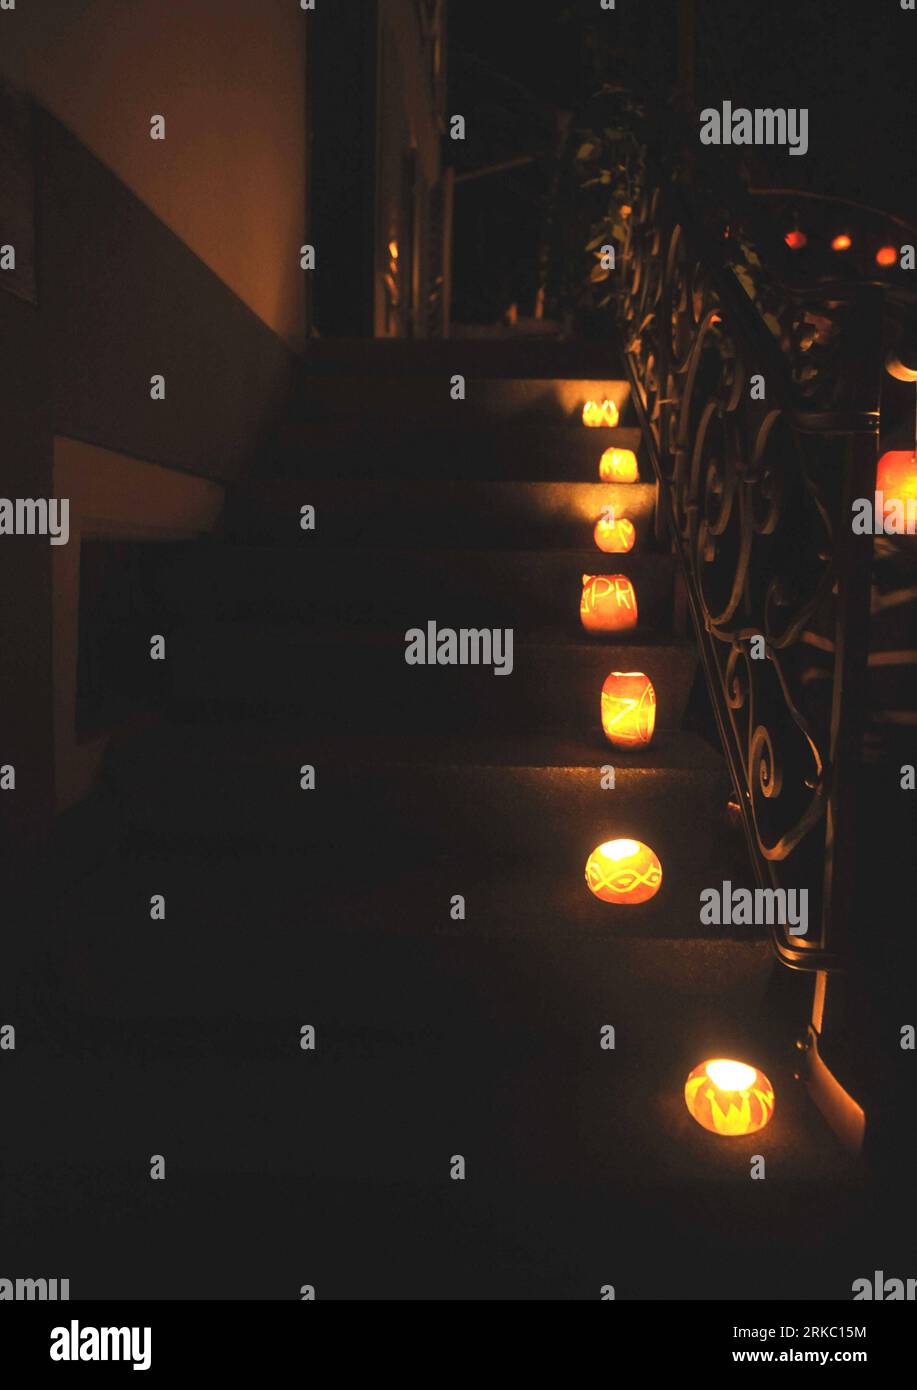 Bildnummer: 54636881  Datum: 13.11.2010  Copyright: imago/Xinhua (101114) --ZURICH, Nov. 14, 2010 (Xinhua) -- Turnip lamps are seen on stairs of house during the Raebechilbi (Turnip Fair) in the village of Richterswil on Lake Zurich, Switzerland, Nov. 13, 2010. Local residents hold Turnip Parade on the second Saturday of every November to mark the transition from autumn to winter. (Xinhua/Yu Yang) SWITZERLAND-ZURICH-TURNIP FAIR PUBLICATIONxNOTxINxCHN Gesellschaft Laterne Laternenfest Tradition Laternenumzug kbdig xdp 2010 hoch premiumd    Bildnummer 54636881 Date 13 11 2010 Copyright Imago XIN Stock Photo